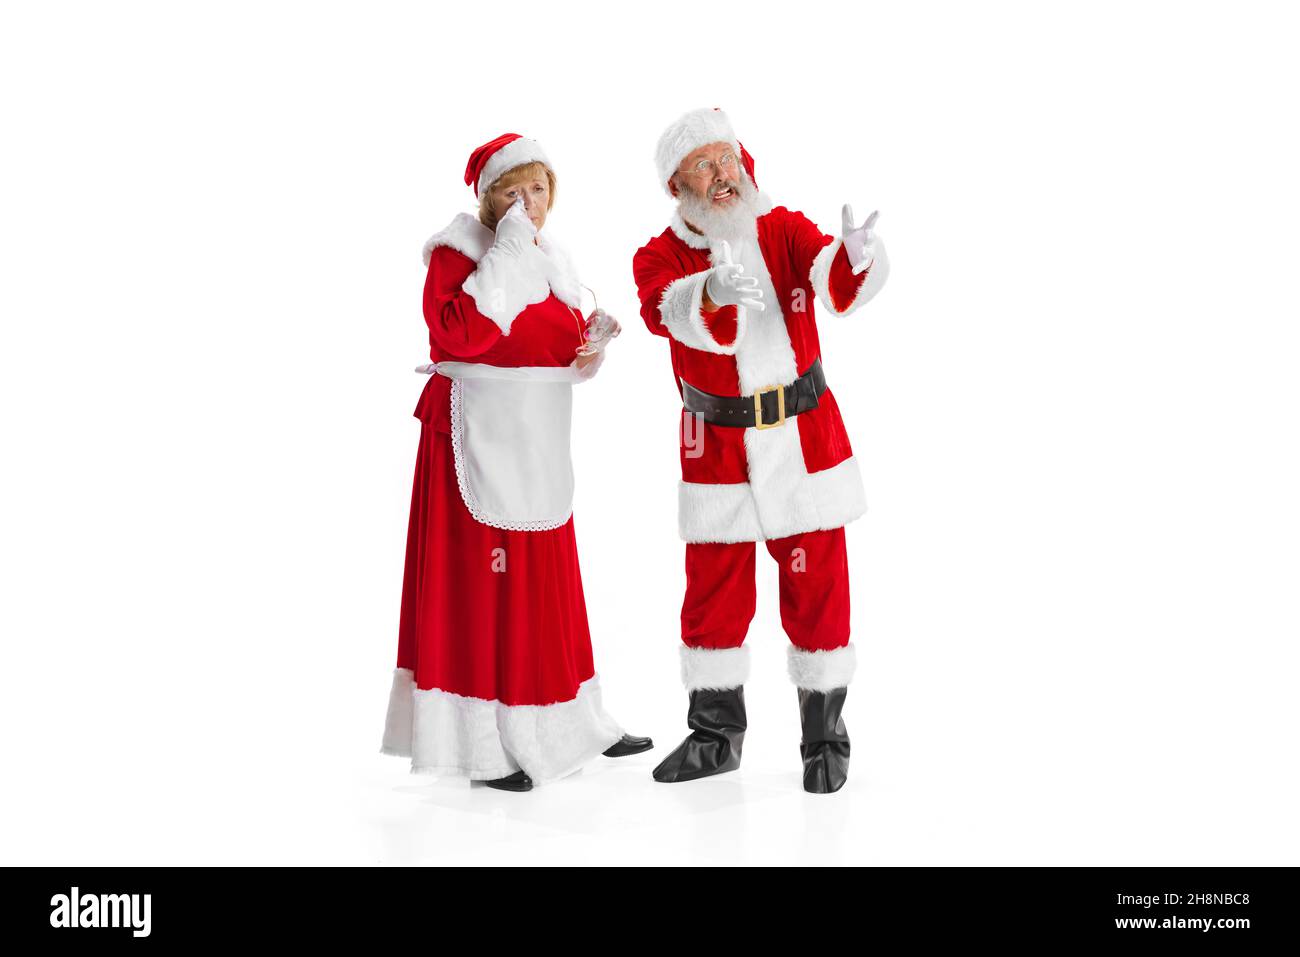 Portrait of two people, man in Santa Claus costume and crying woman, missis Claus isolated on white background. Stock Photo